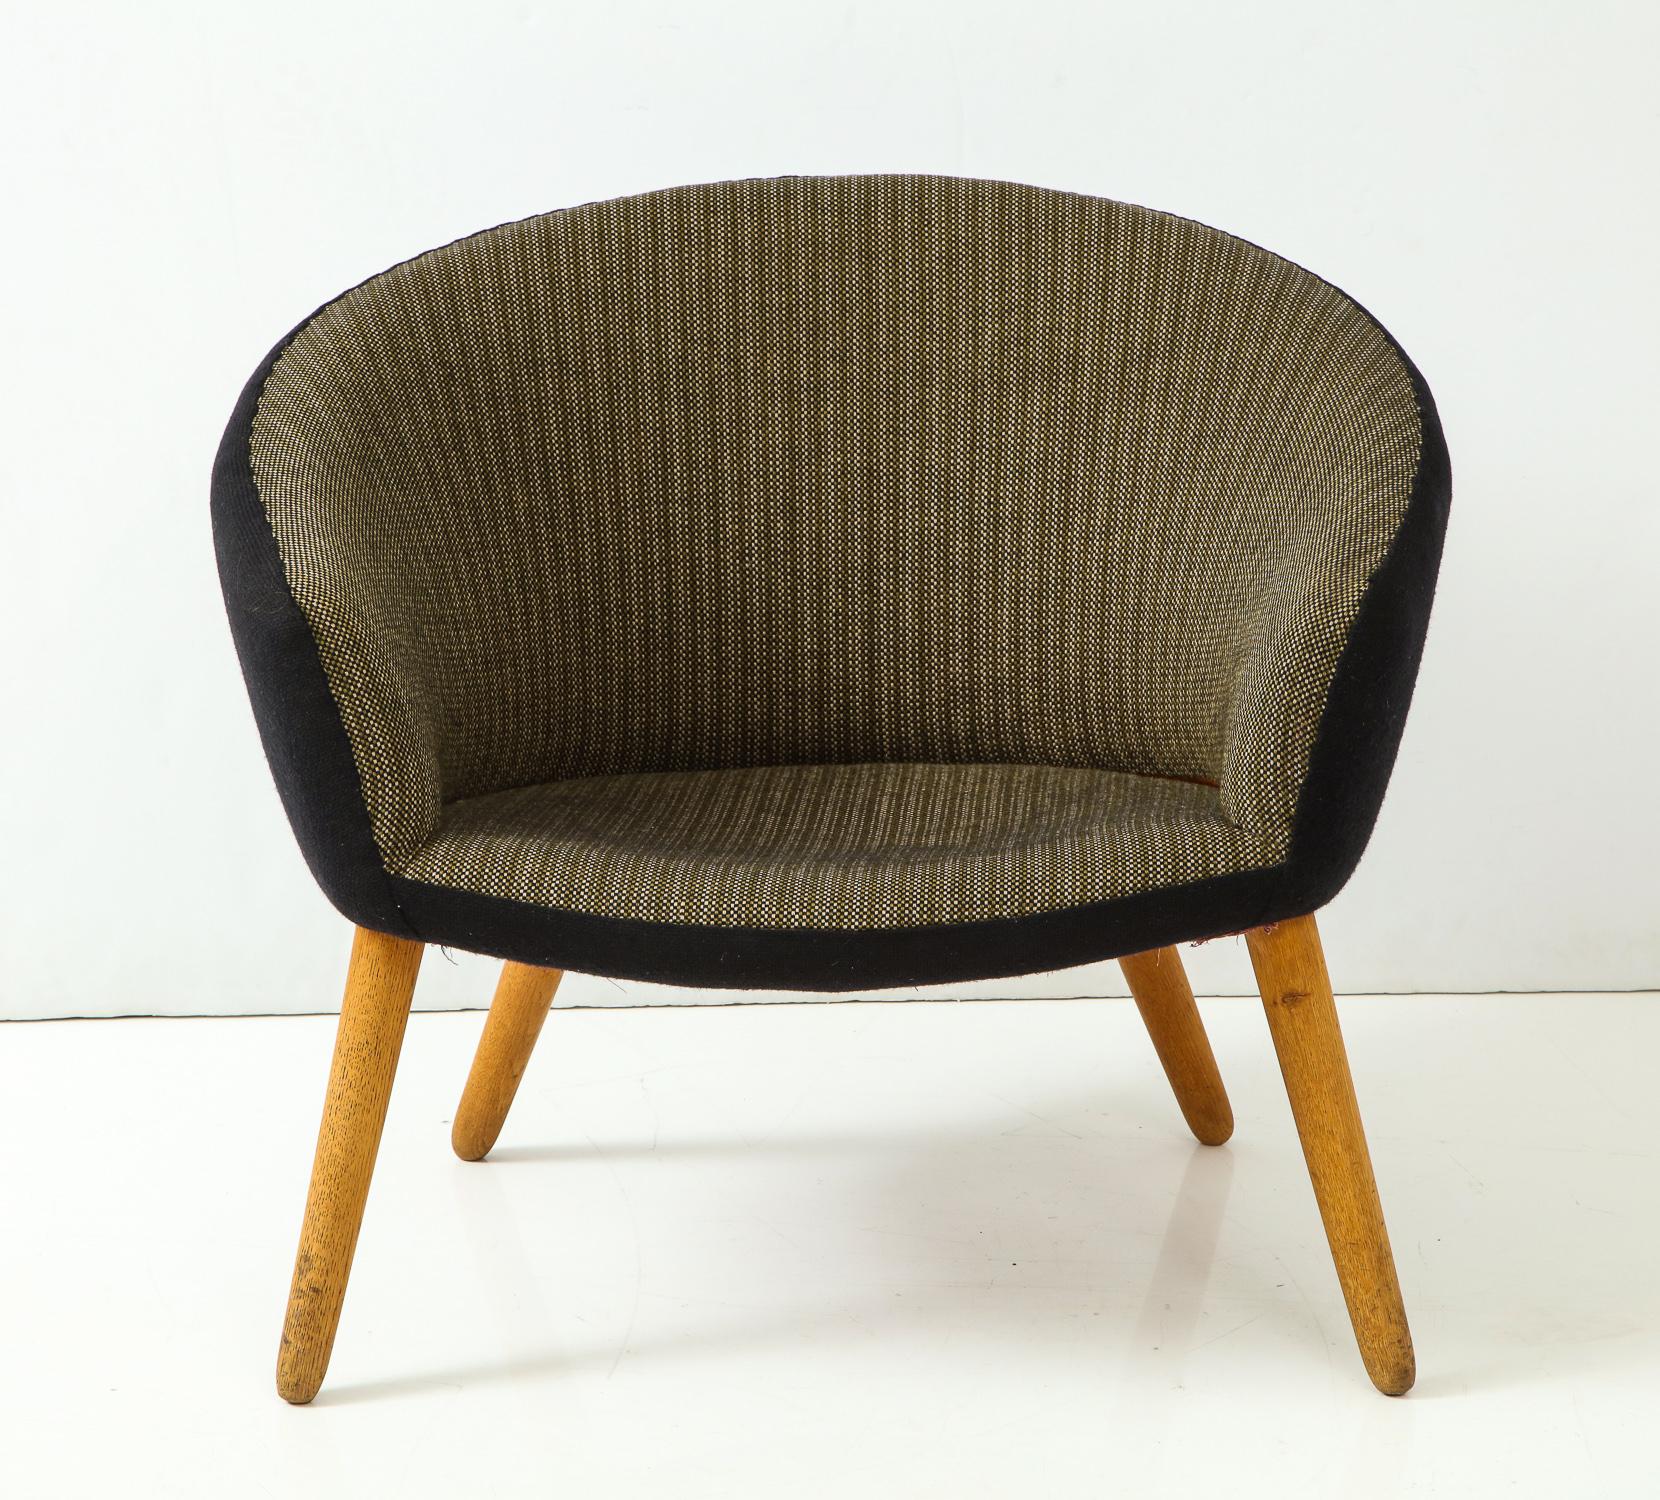 Curved-back lounge chair with splayed oak legs and original two-tone fabric. Designed by Nanna Ditzel and produced in Denmark by A.P. Stolen, circa 1950s. A nice vintage example; the two-tone fabric accentuates the curvilinear shape of the back.